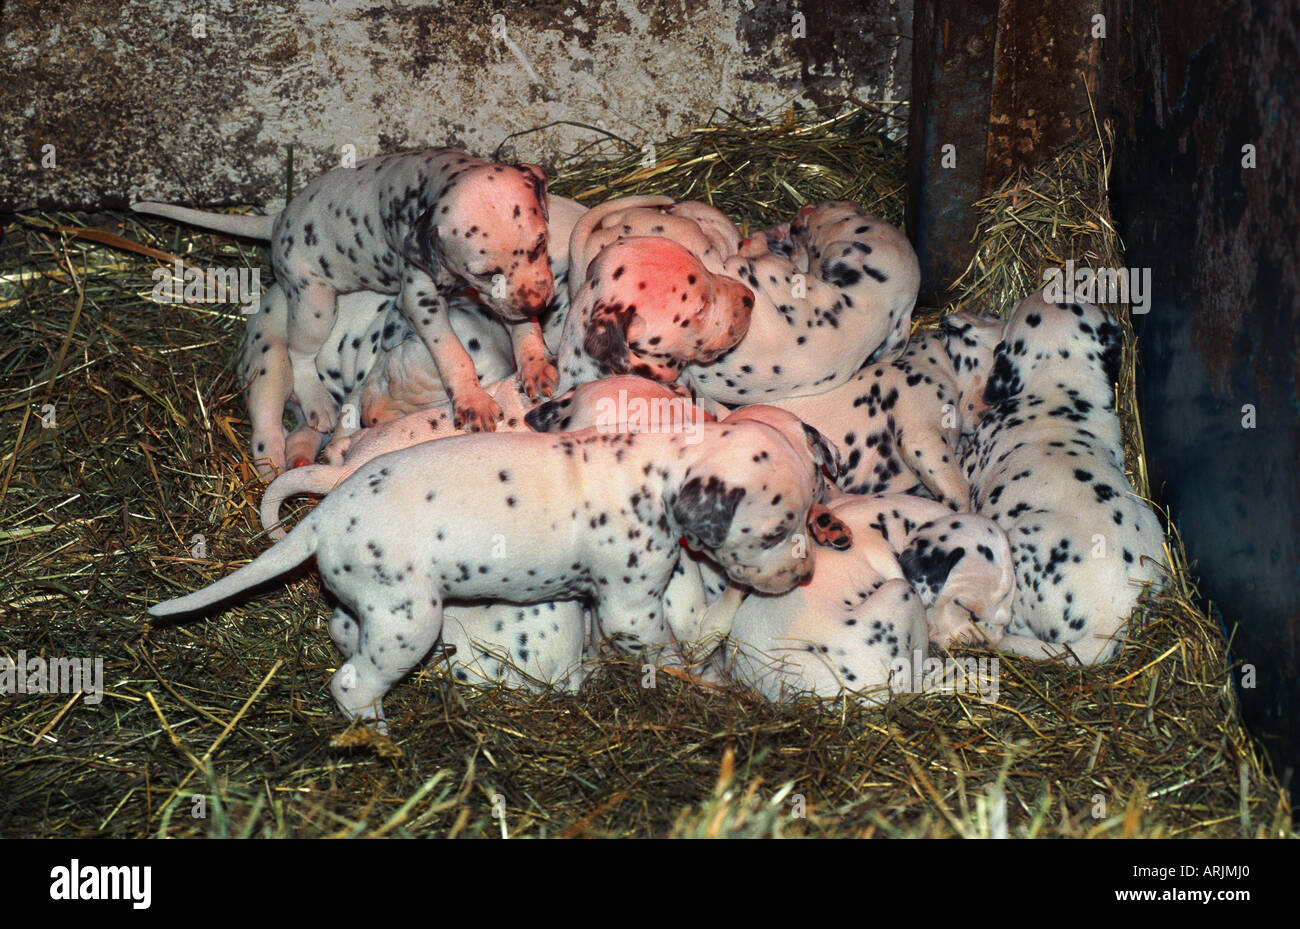 Dalmatian (Canis lupus f. familiaris), puppies lying together in straw, under red light Stock Photo